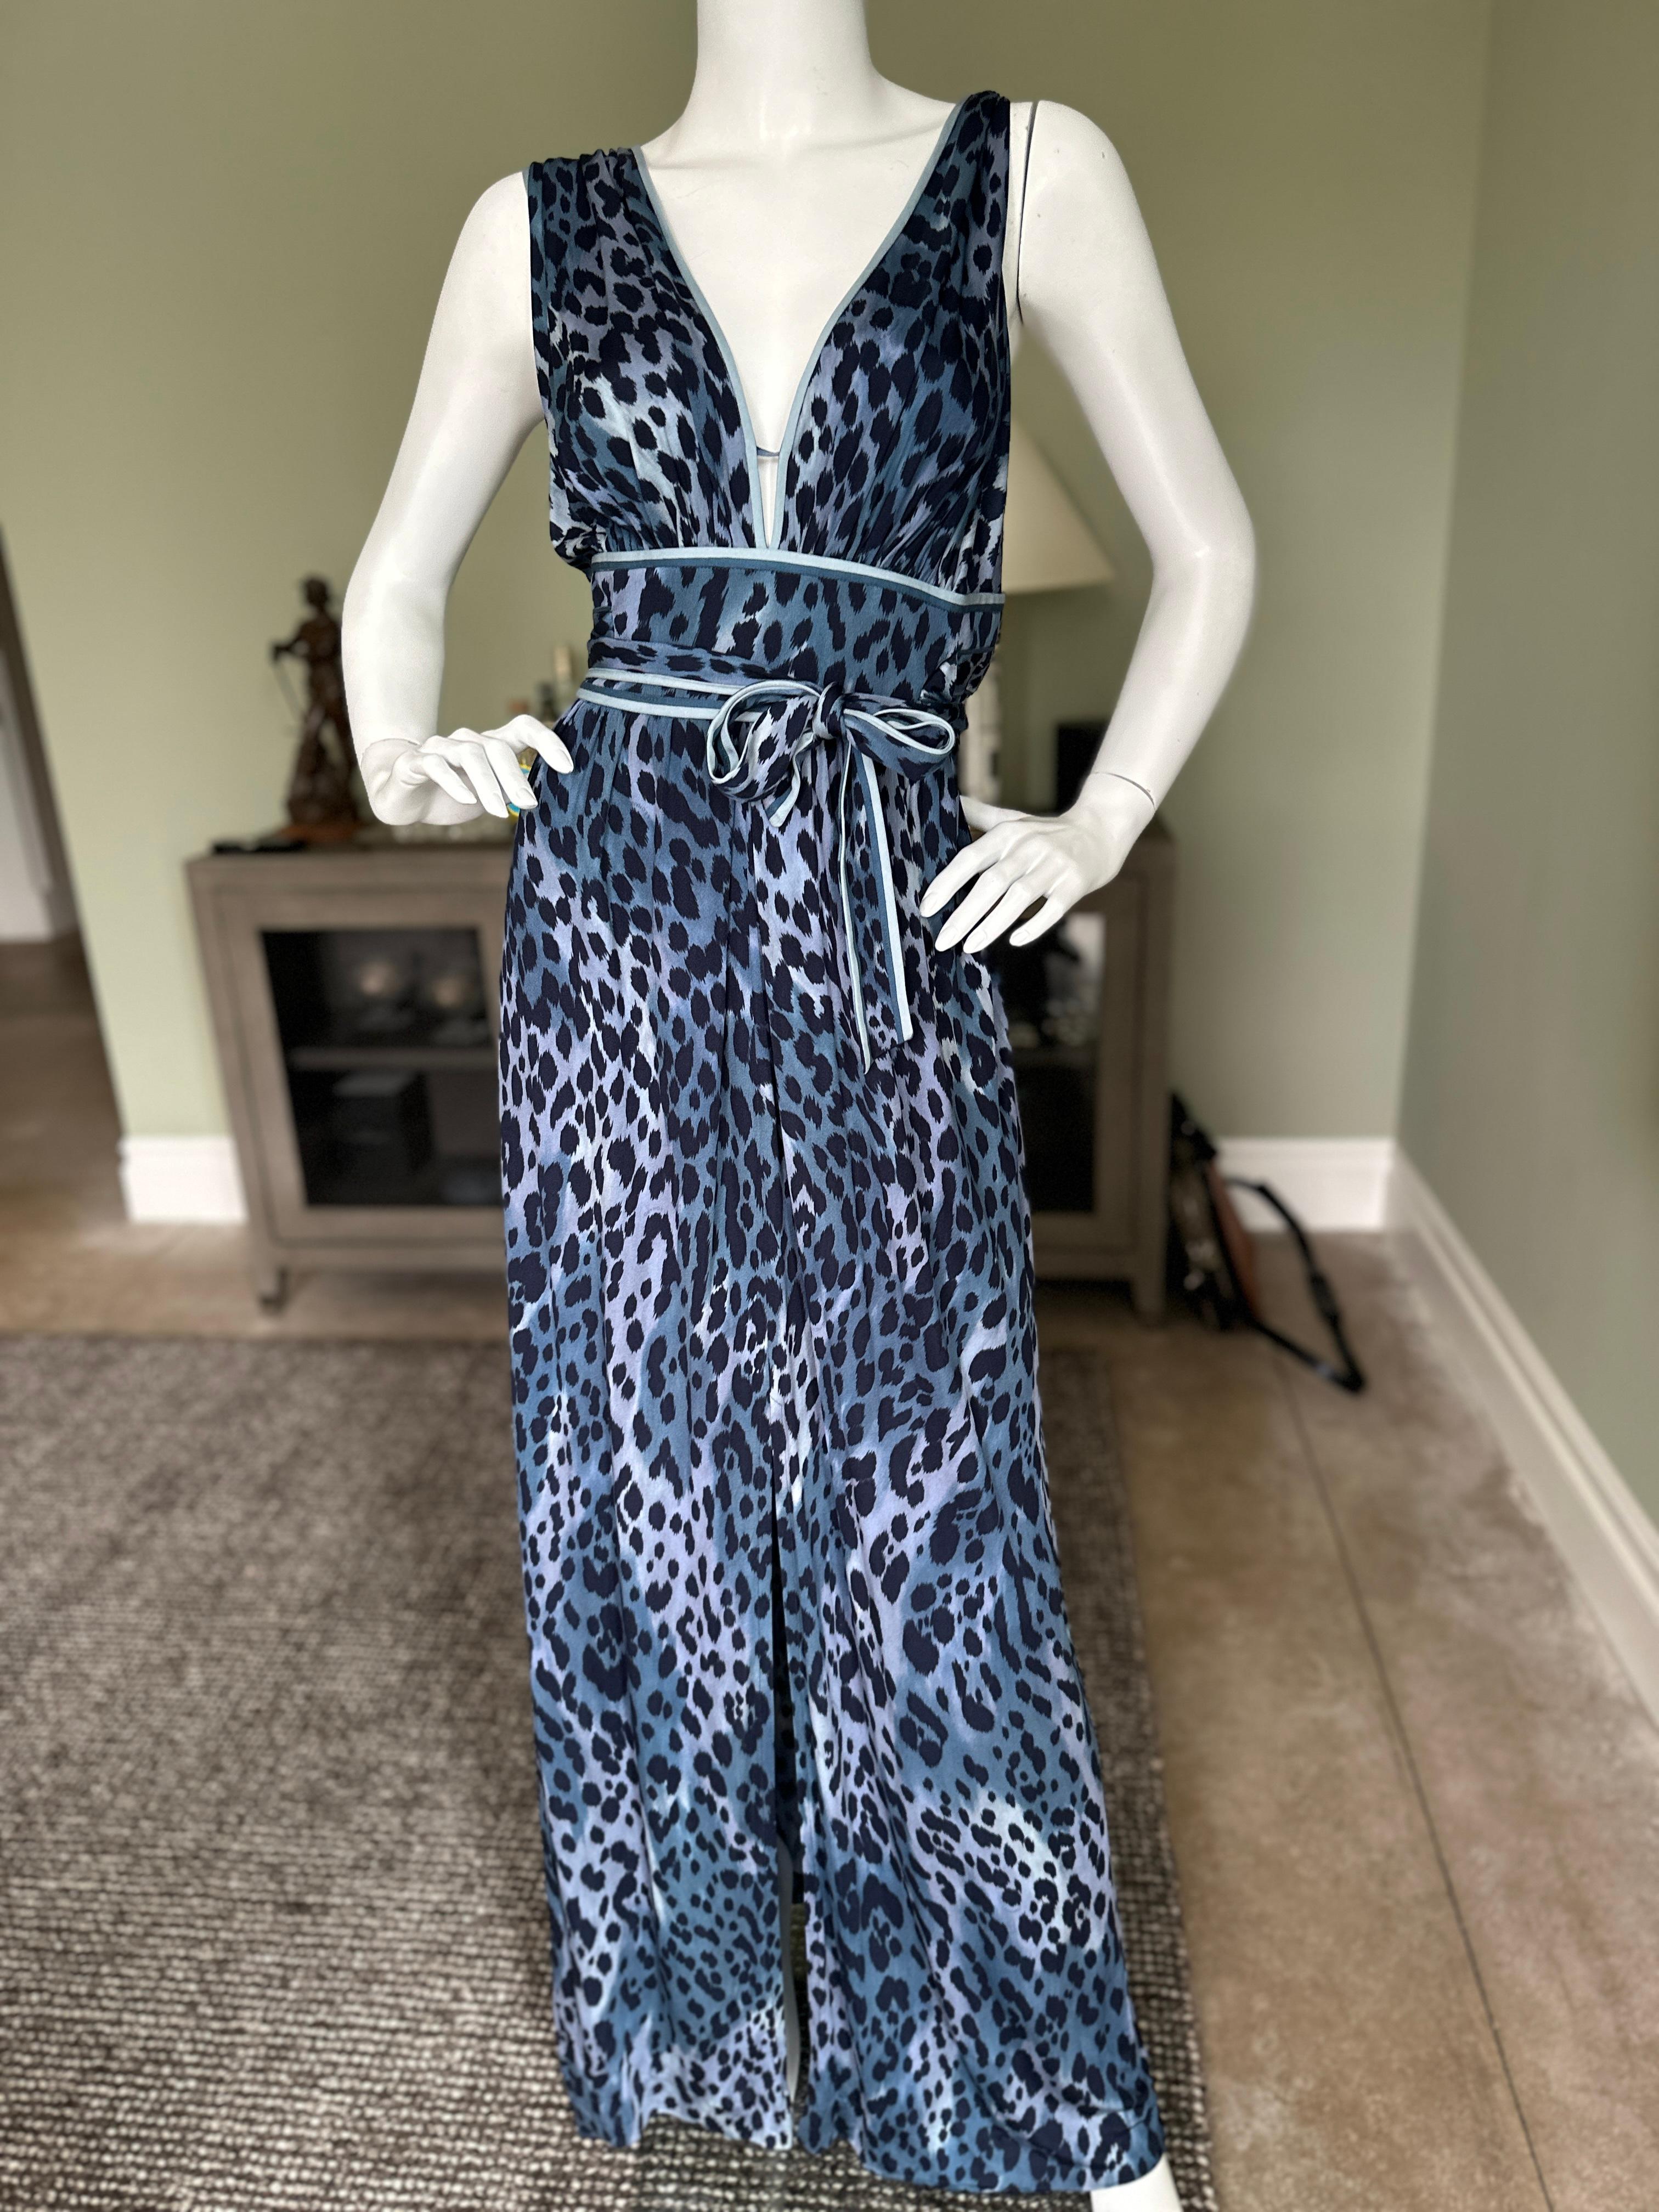 Leonard Paris Vintage Silk Leopard Print Evening Dress with Matching Shawl sz 48 In Excellent Condition For Sale In Cloverdale, CA